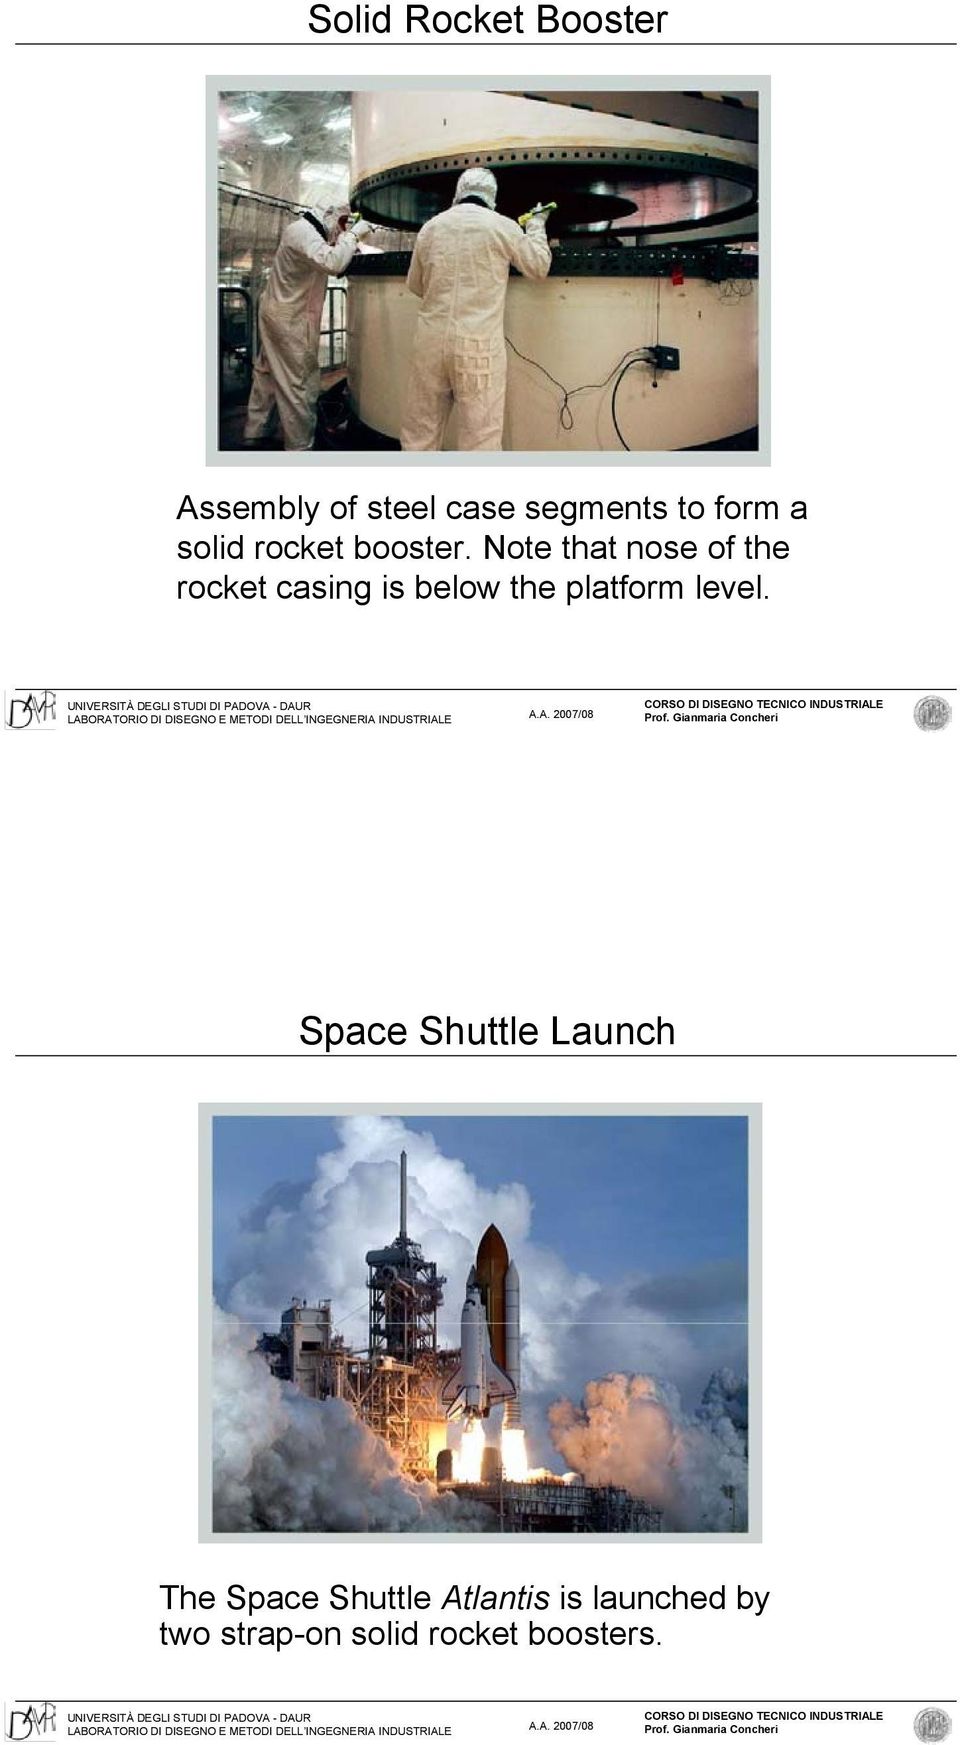 Note that nose of the rocket casing is below the platform